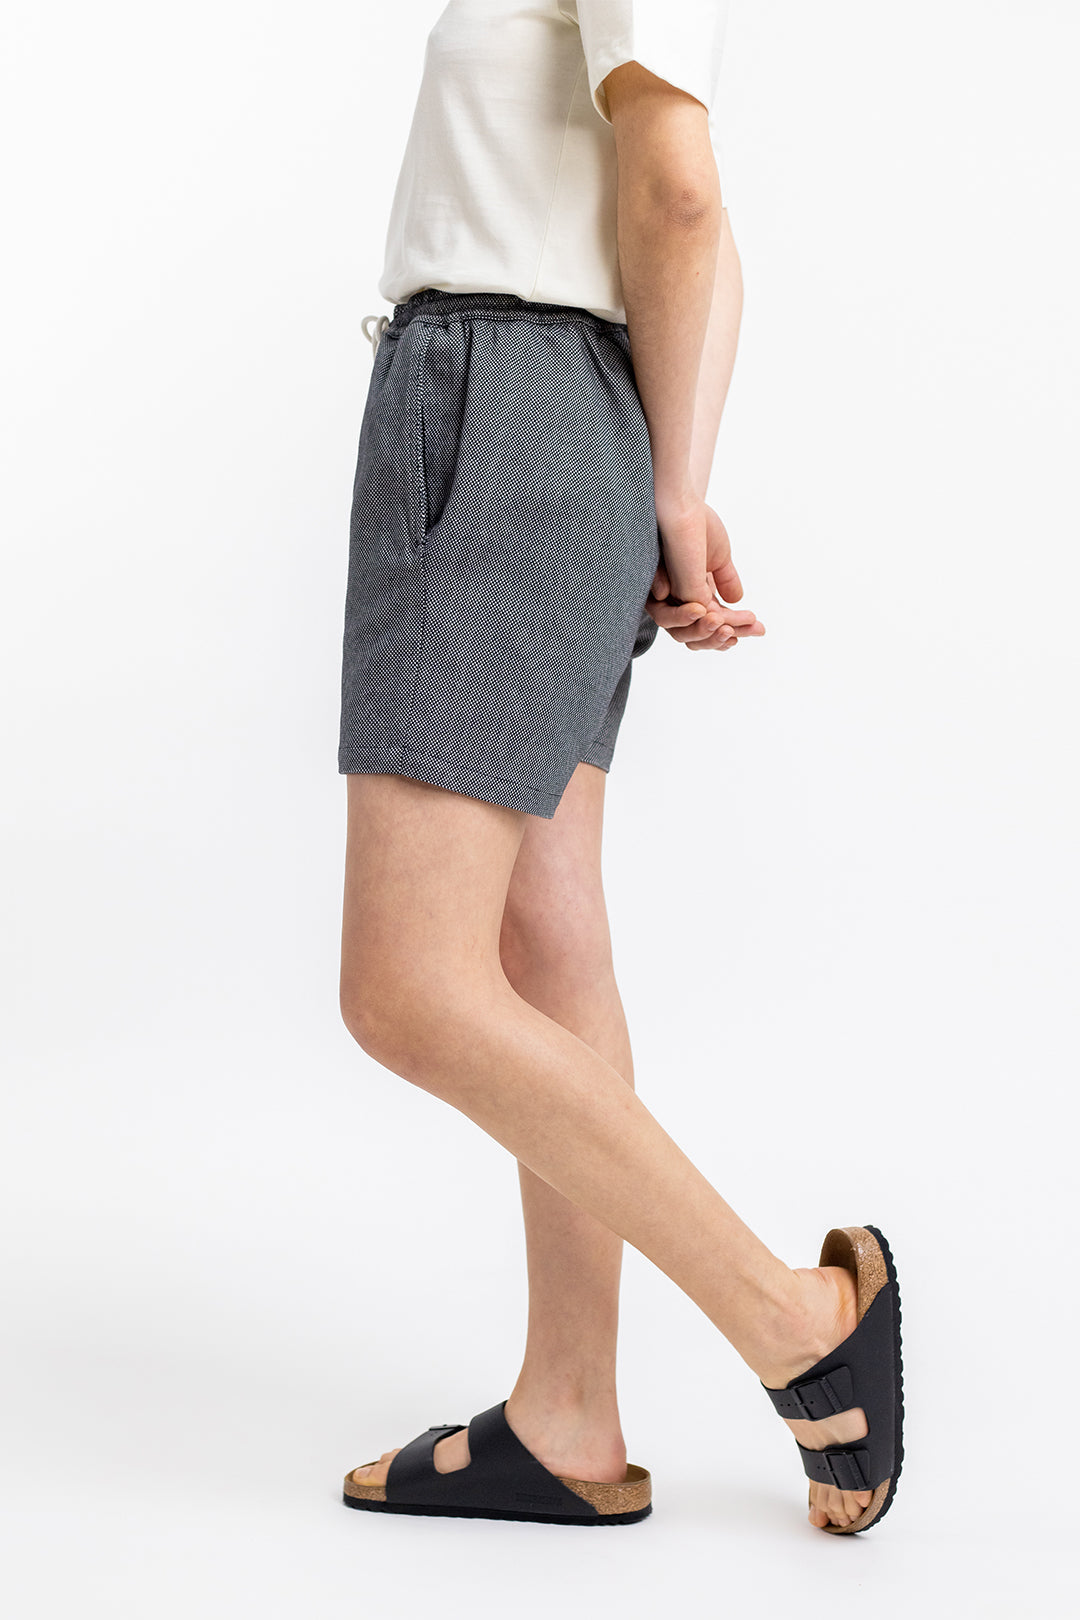 Gray checked shorts made from 100% organic cotton from Rotholz